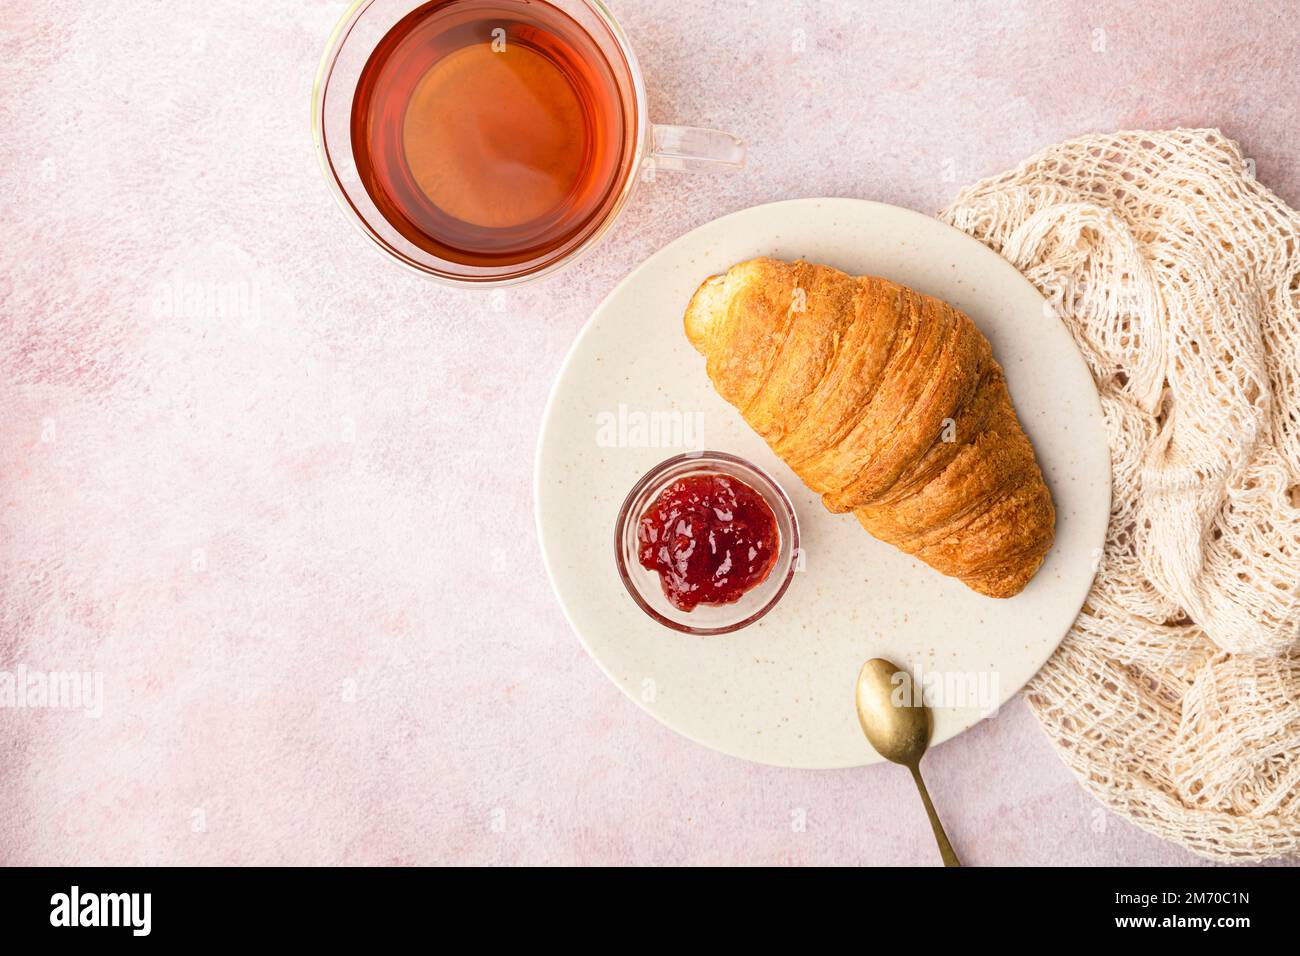 Tea and croissant over table Stock Photo